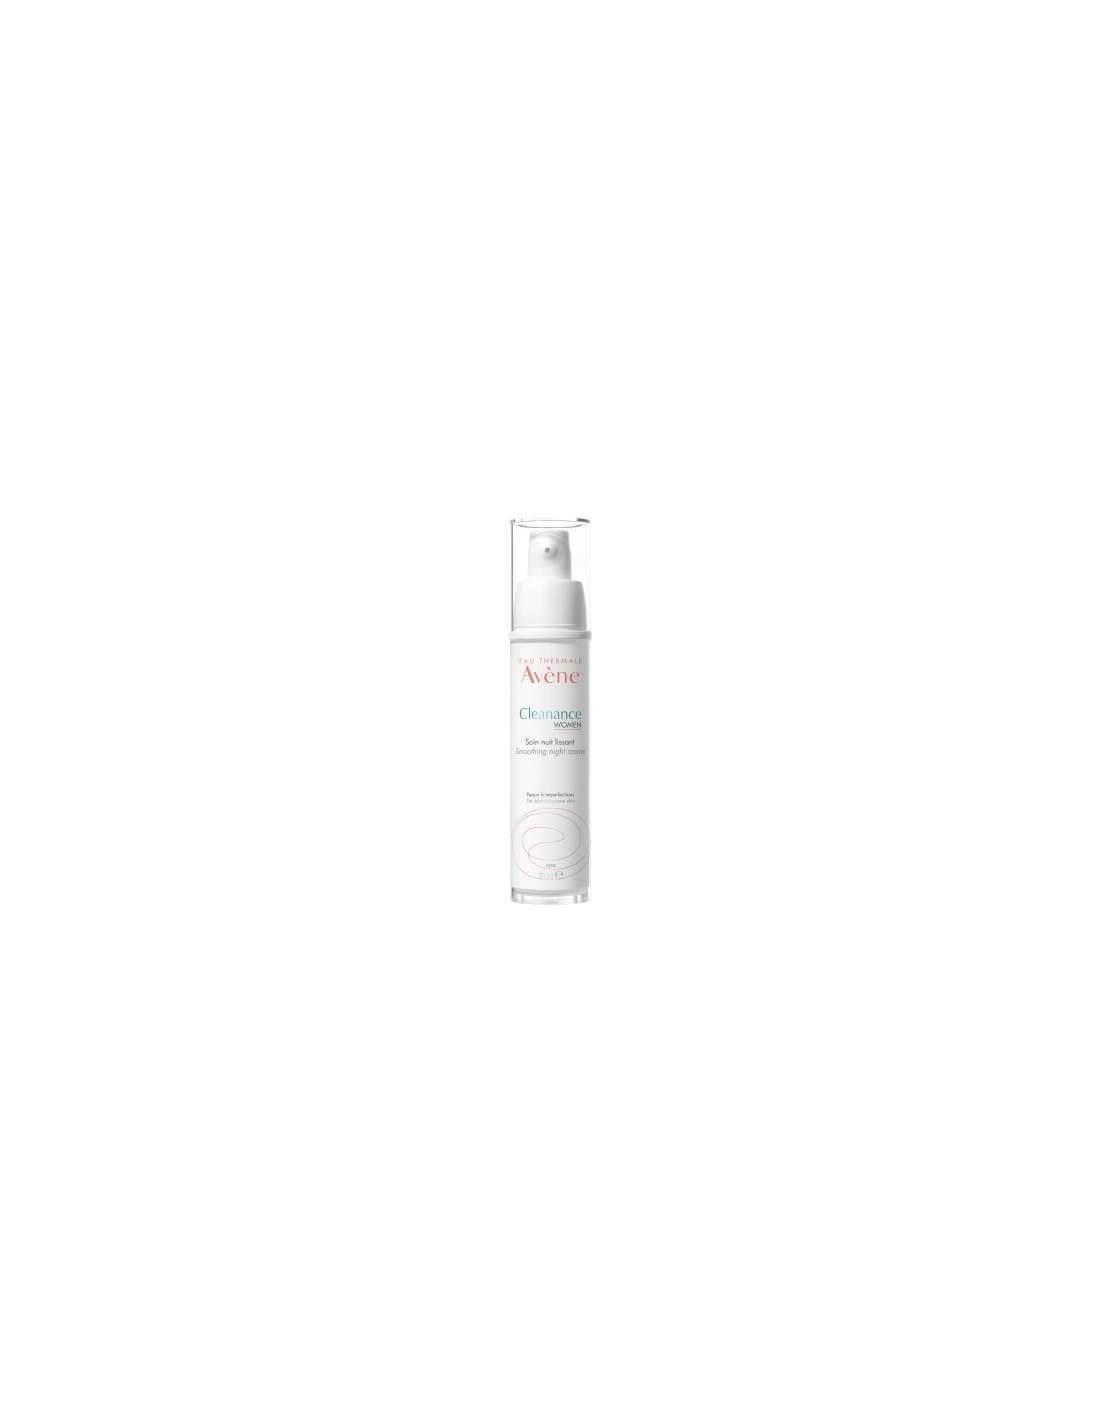 https://hyaluronicfillermarket.com/5331-thickbox_default/avene-cleanance-women-smoothing-night-care-for-skin-with-imperfections-30ml.jpg